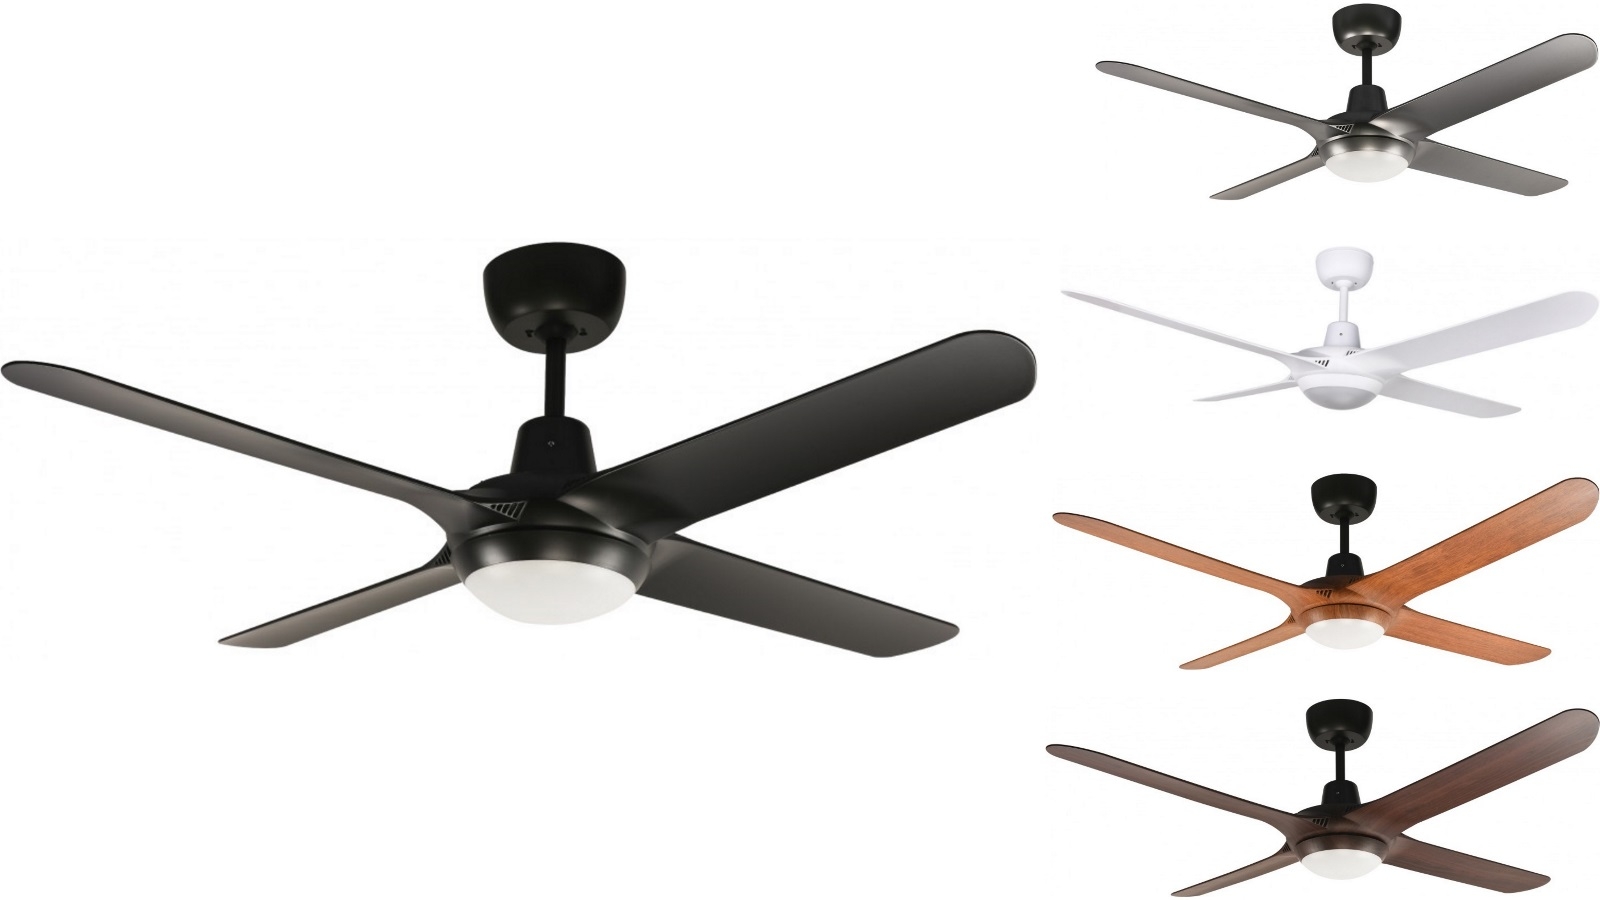 Ventair Spyda 56" 1423mm 4 Blade Indoor/Outdoor Ceiling Fan with CCT LED Light 